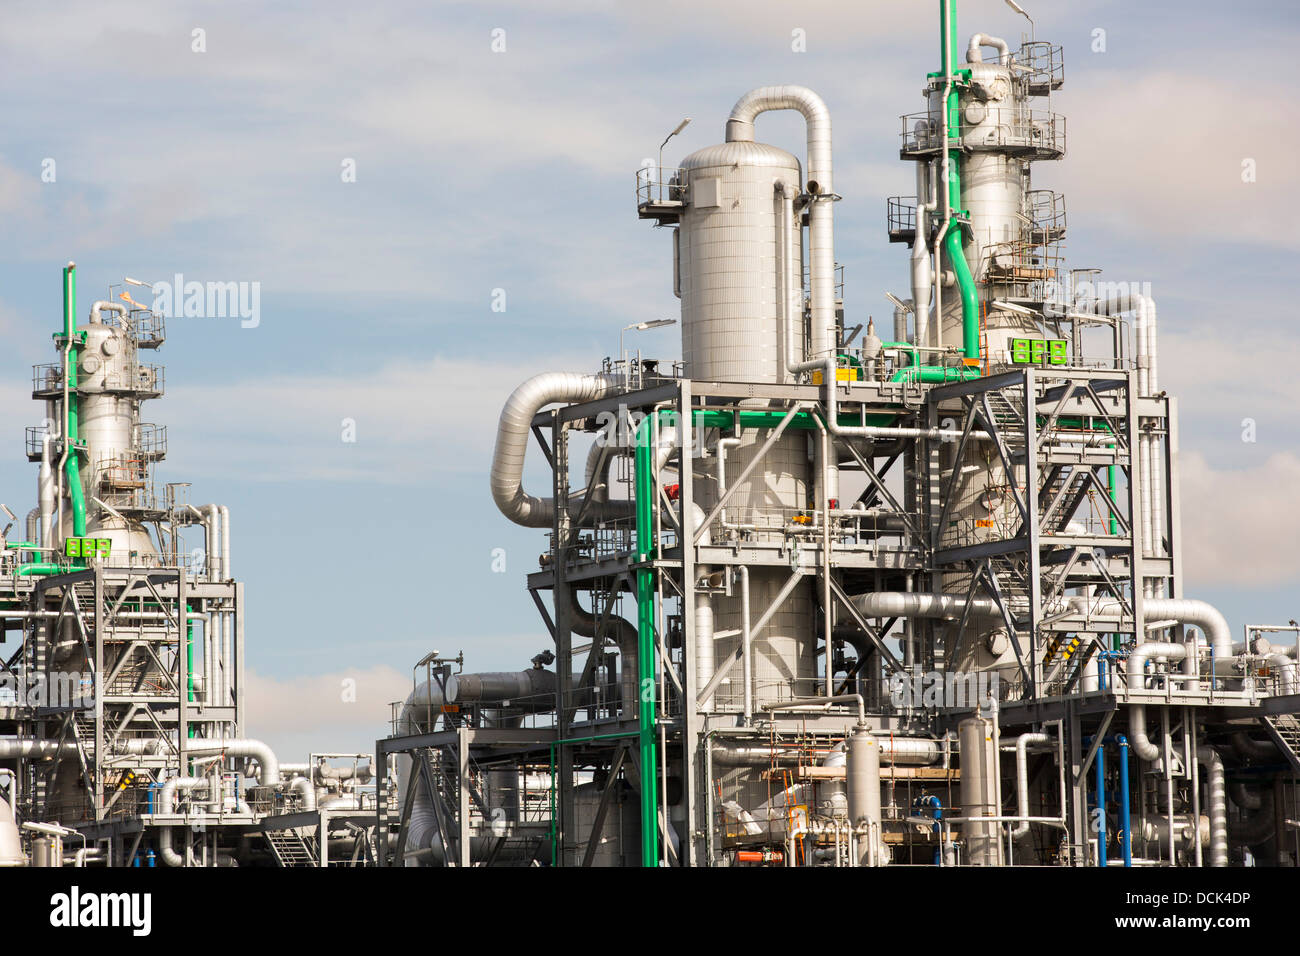 A BP chemical plant at salt End on Humberside which produces Acetic Acid. Stock Photo